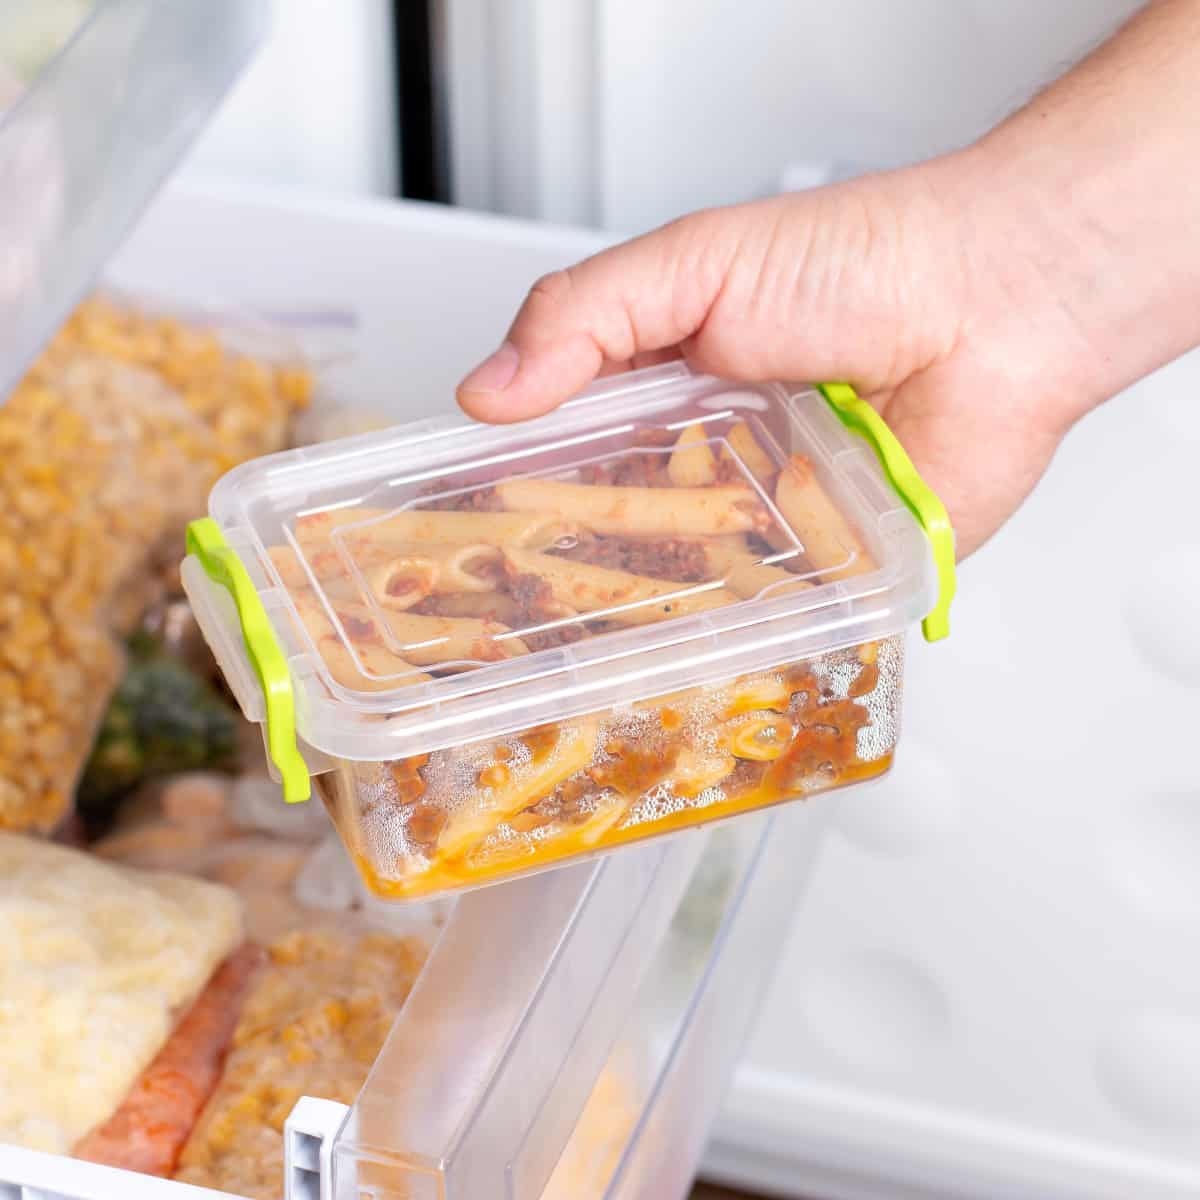 hand placing a Tupperware container of pasta into the freezer